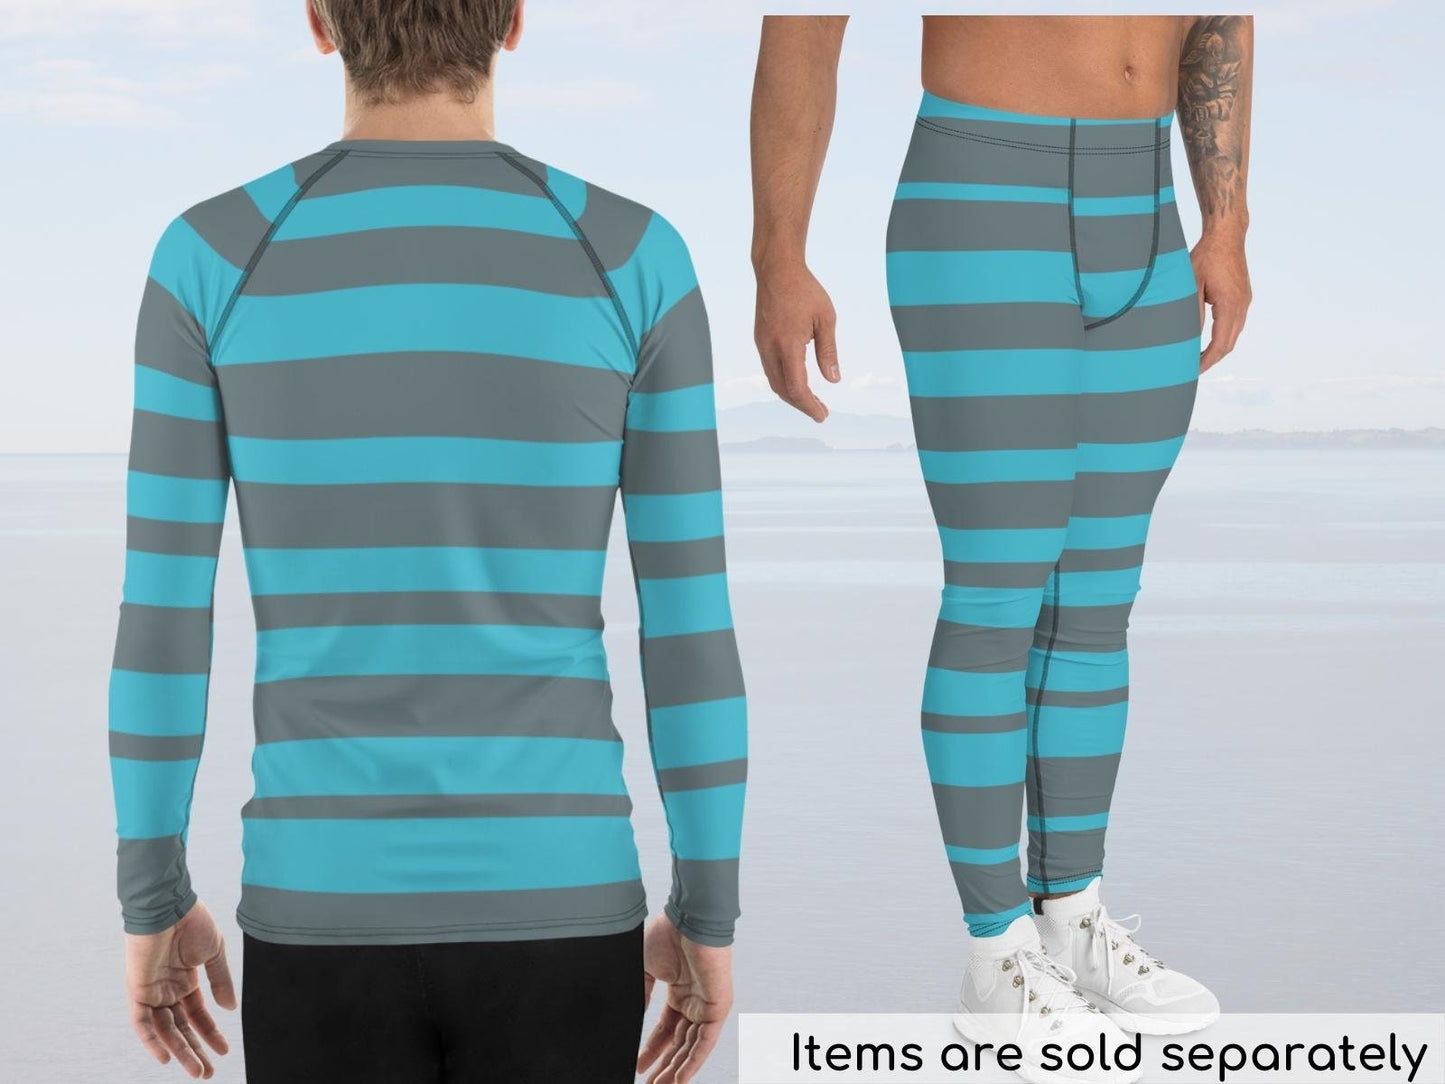 Blue Cheshire Cat Men's Rash Guard and Pants, Alice in Wonderland Party, Cosplay, Striped Halloween Costume